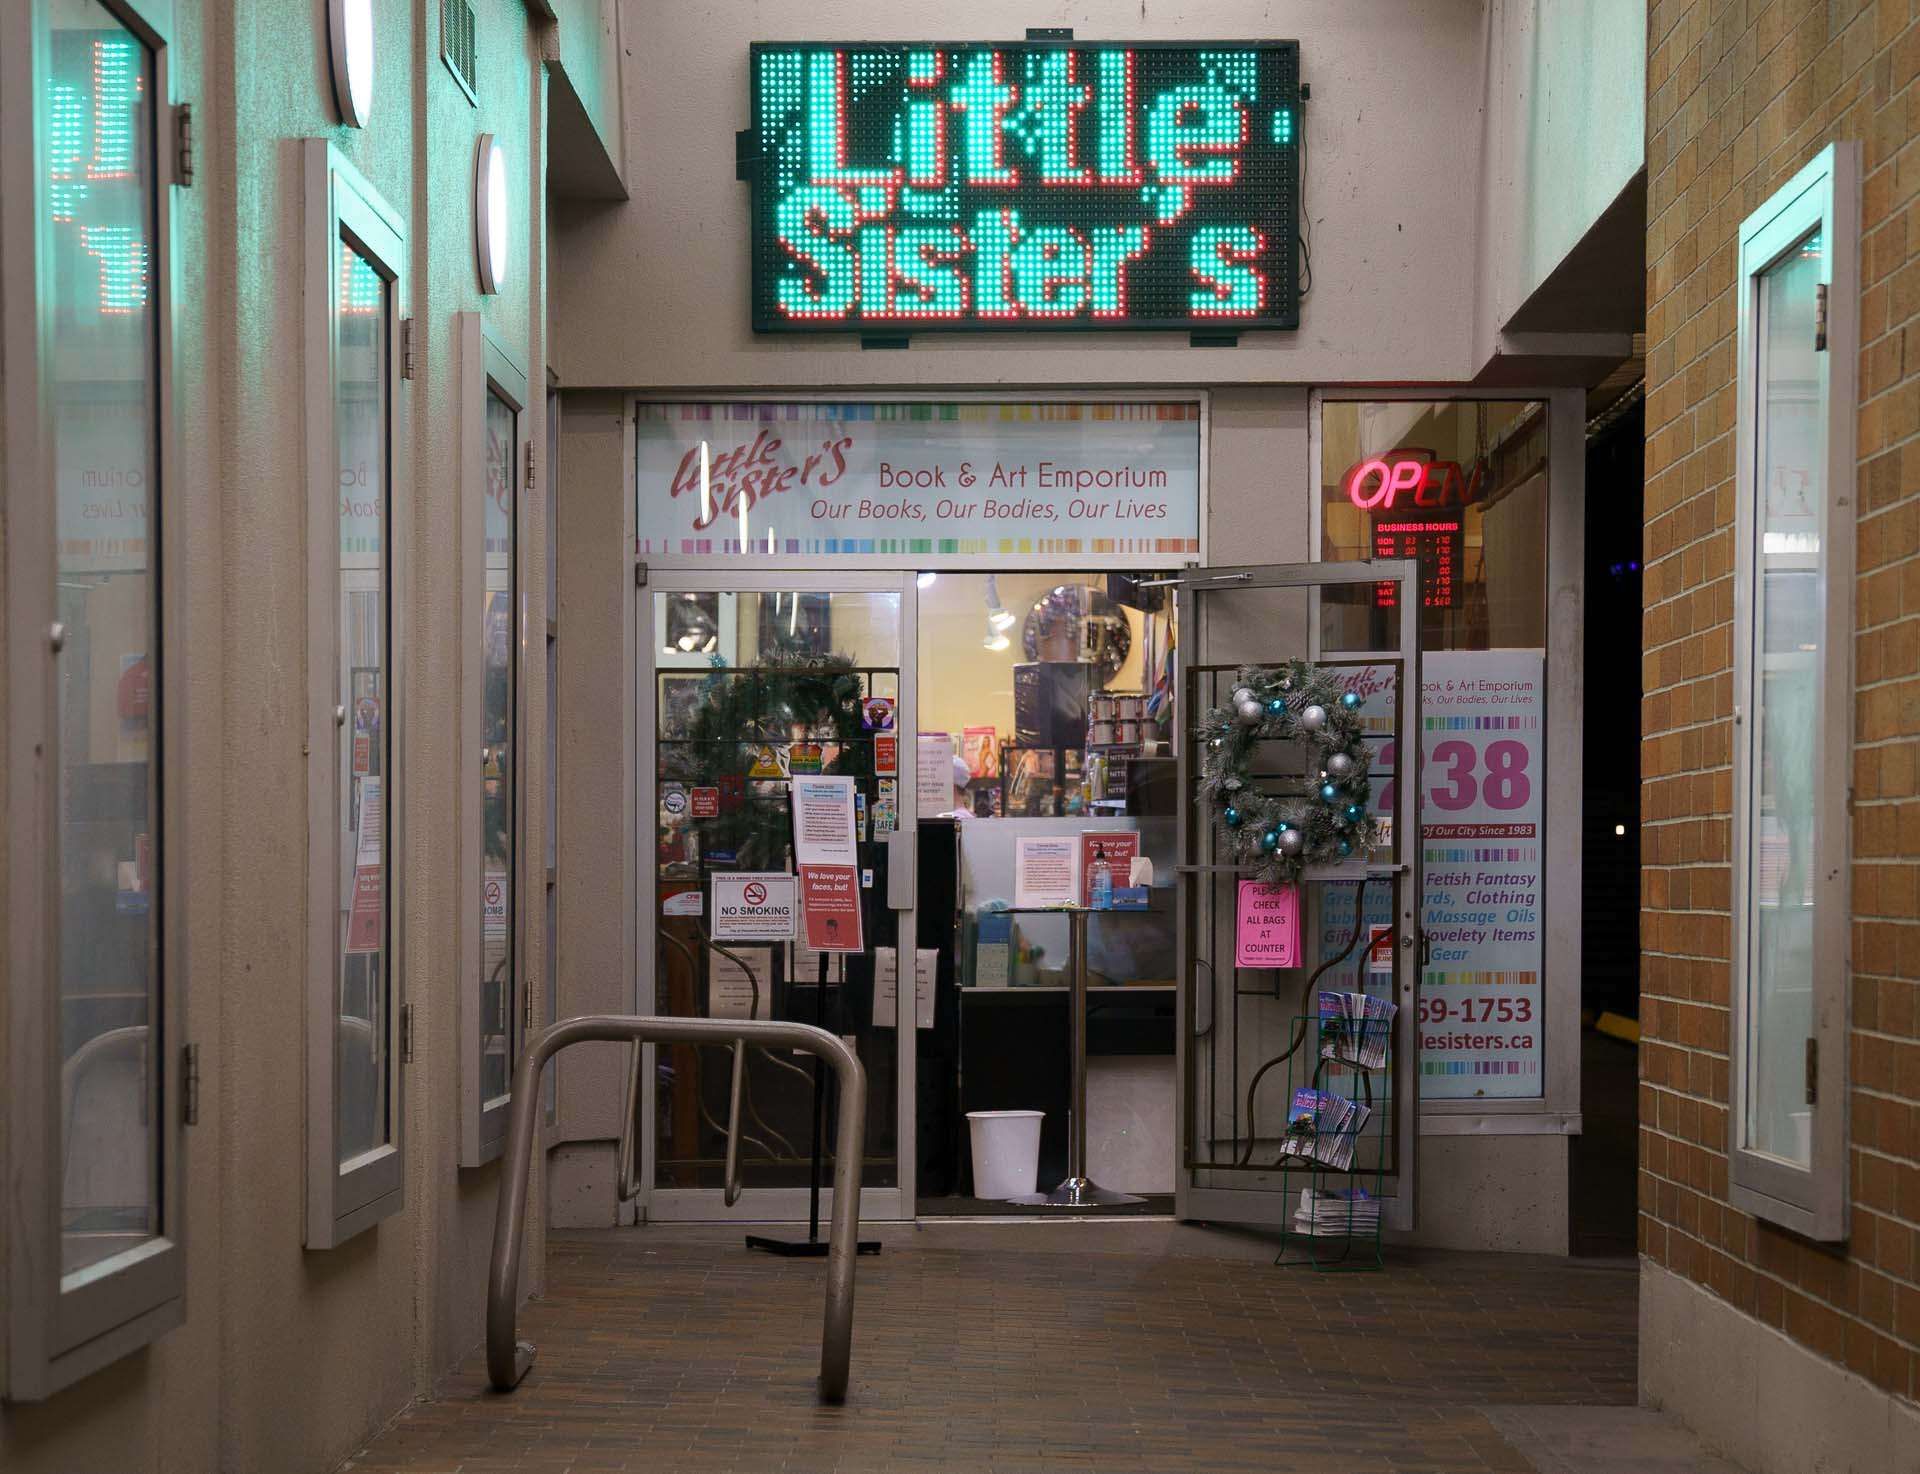 Little Sisters Entrance off Daive Street